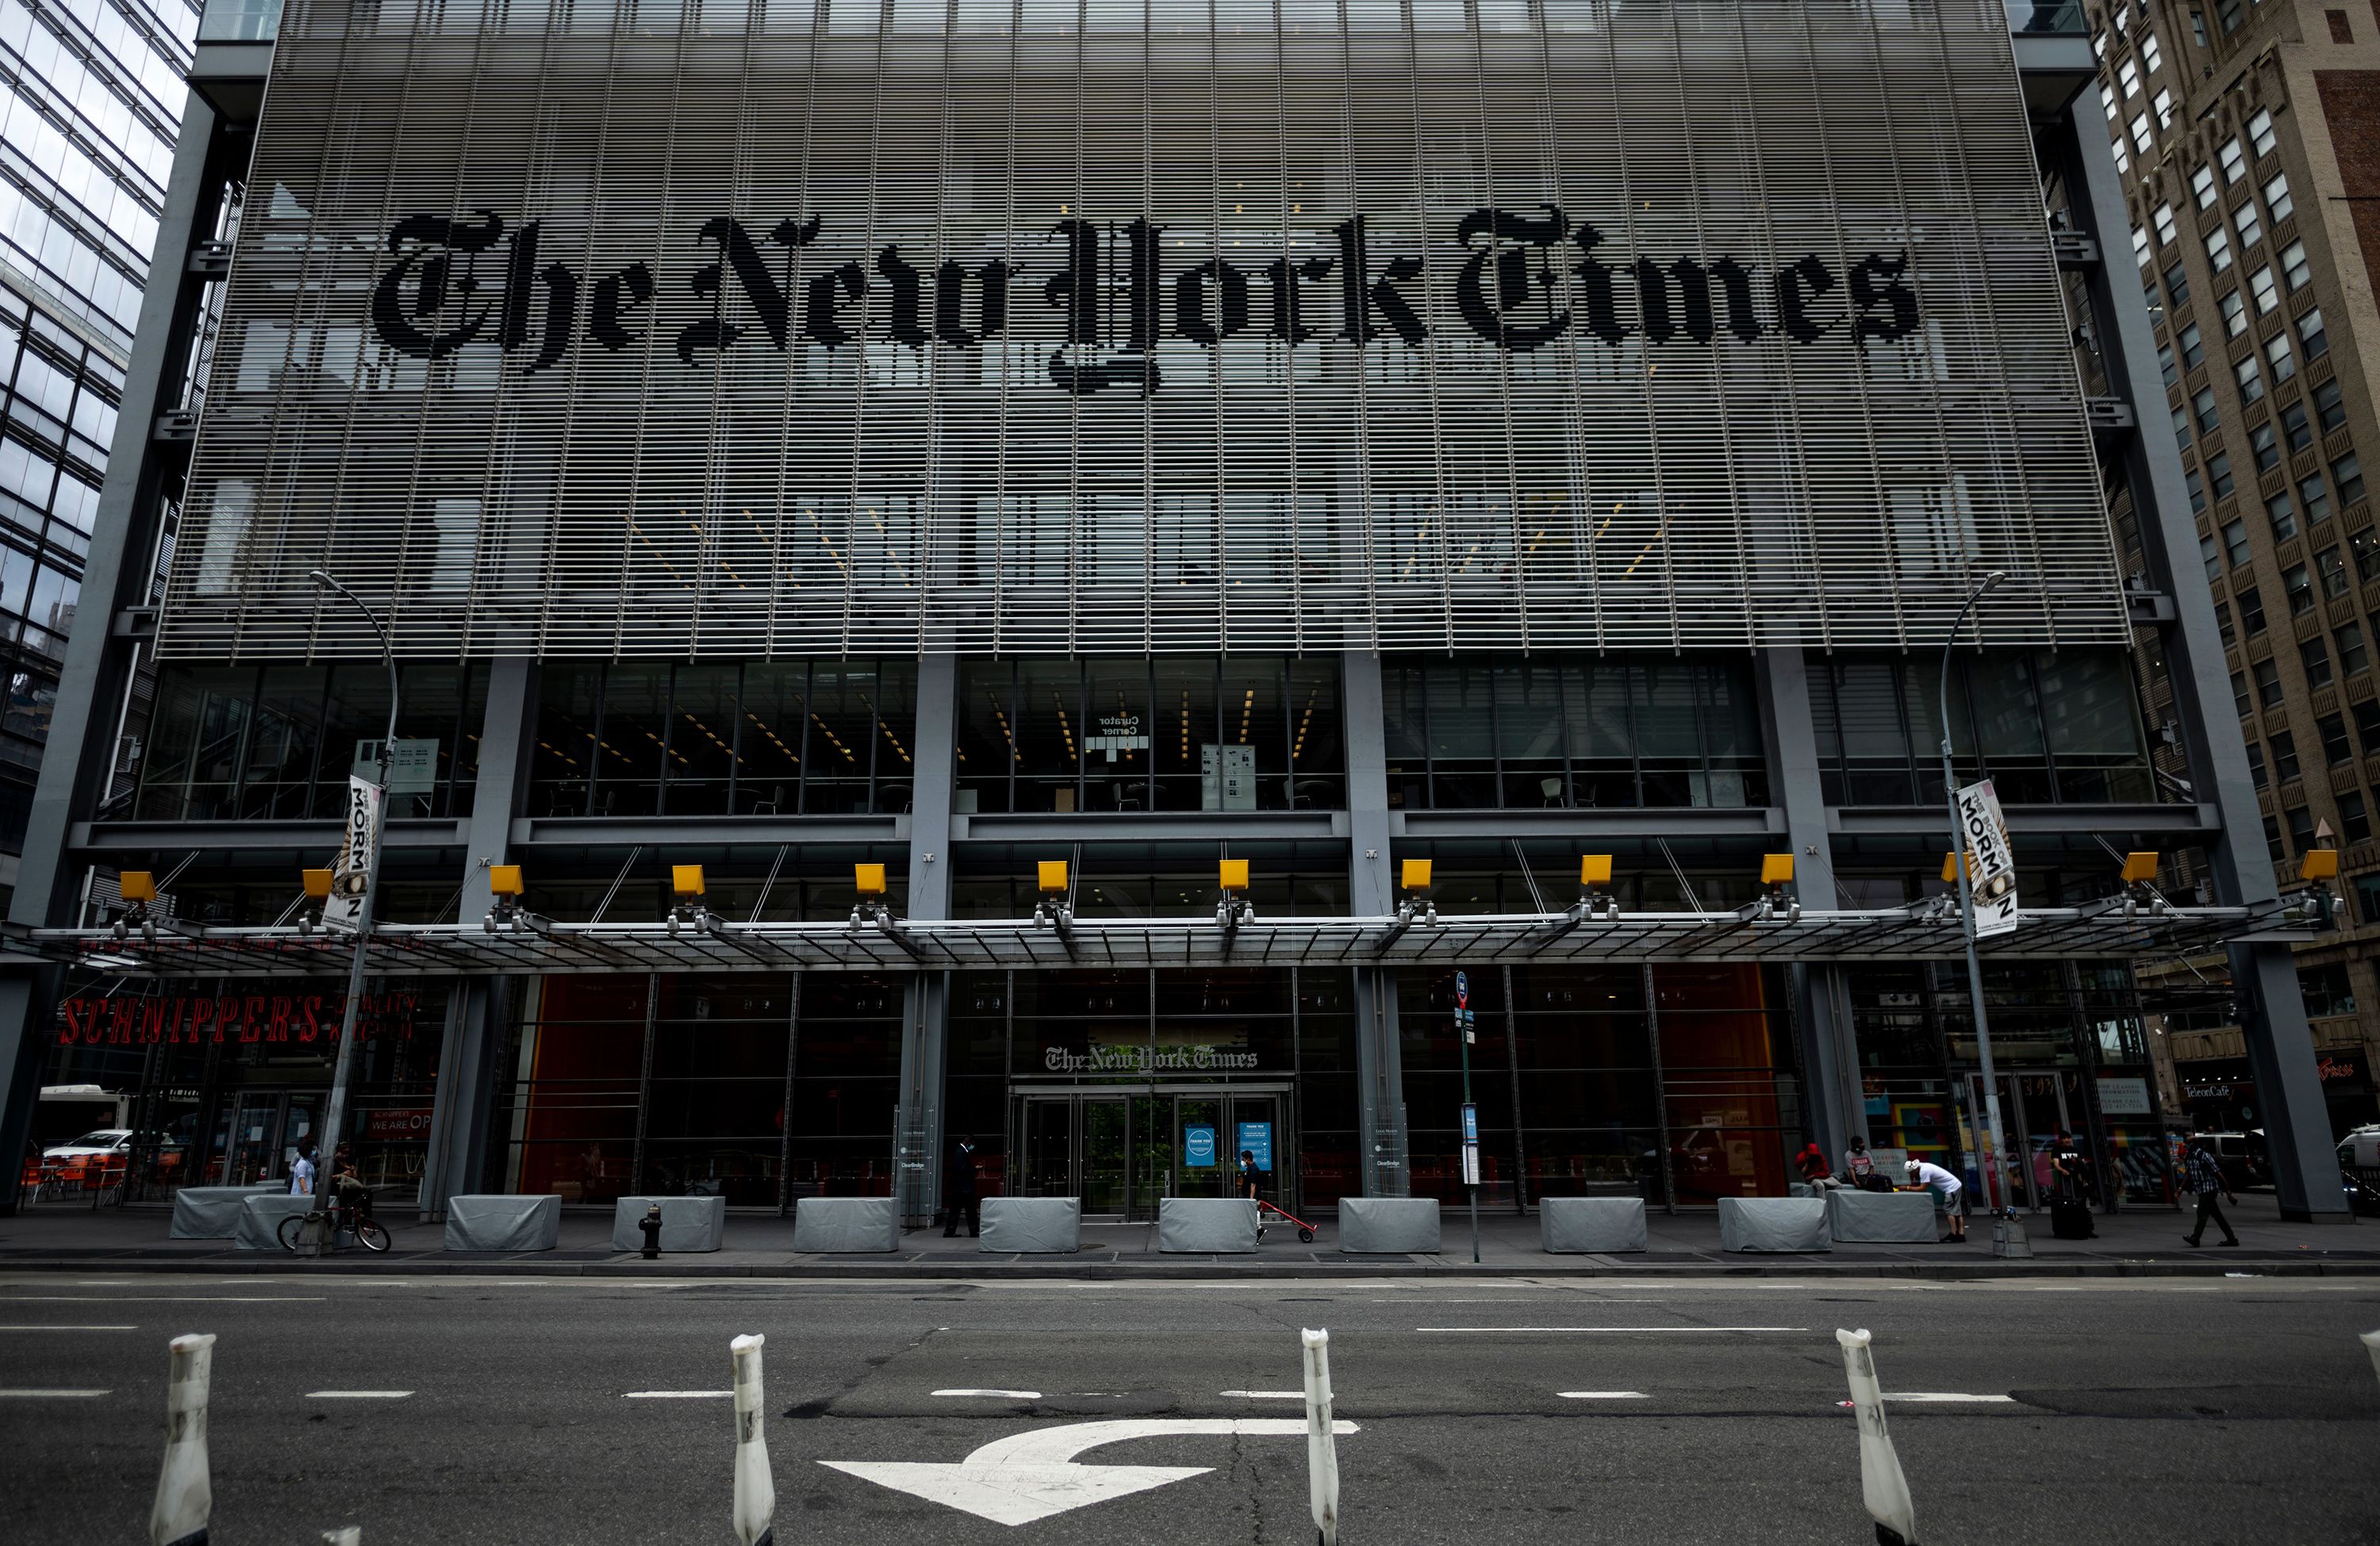 Wordle: once-a-day word game acquired by The New York Times